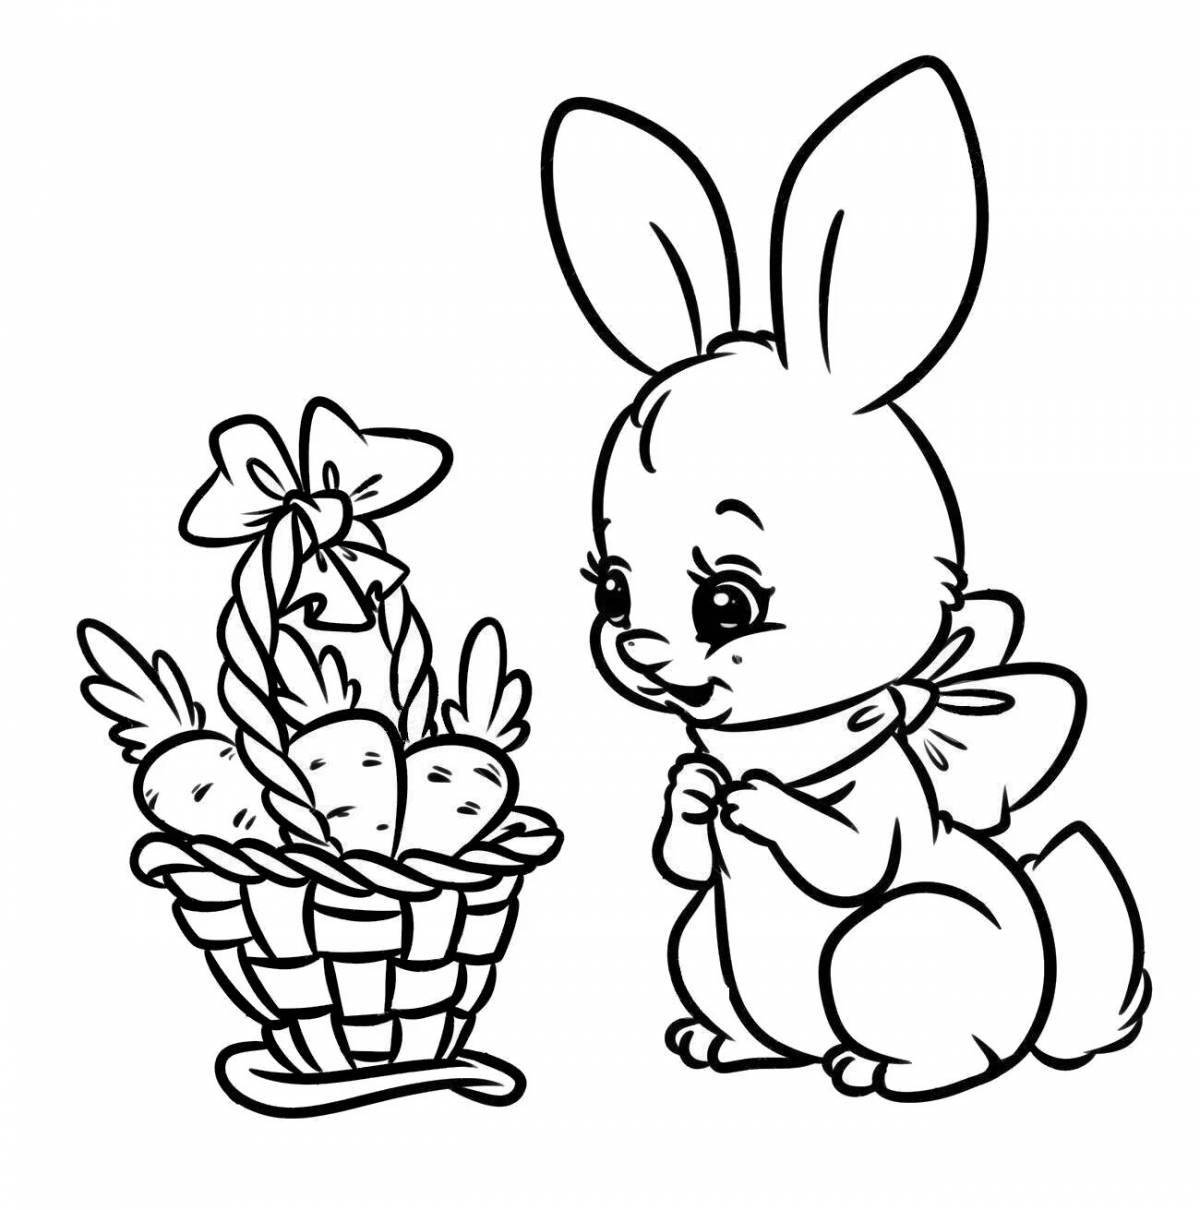 Inspirational bunny with carrots coloring book